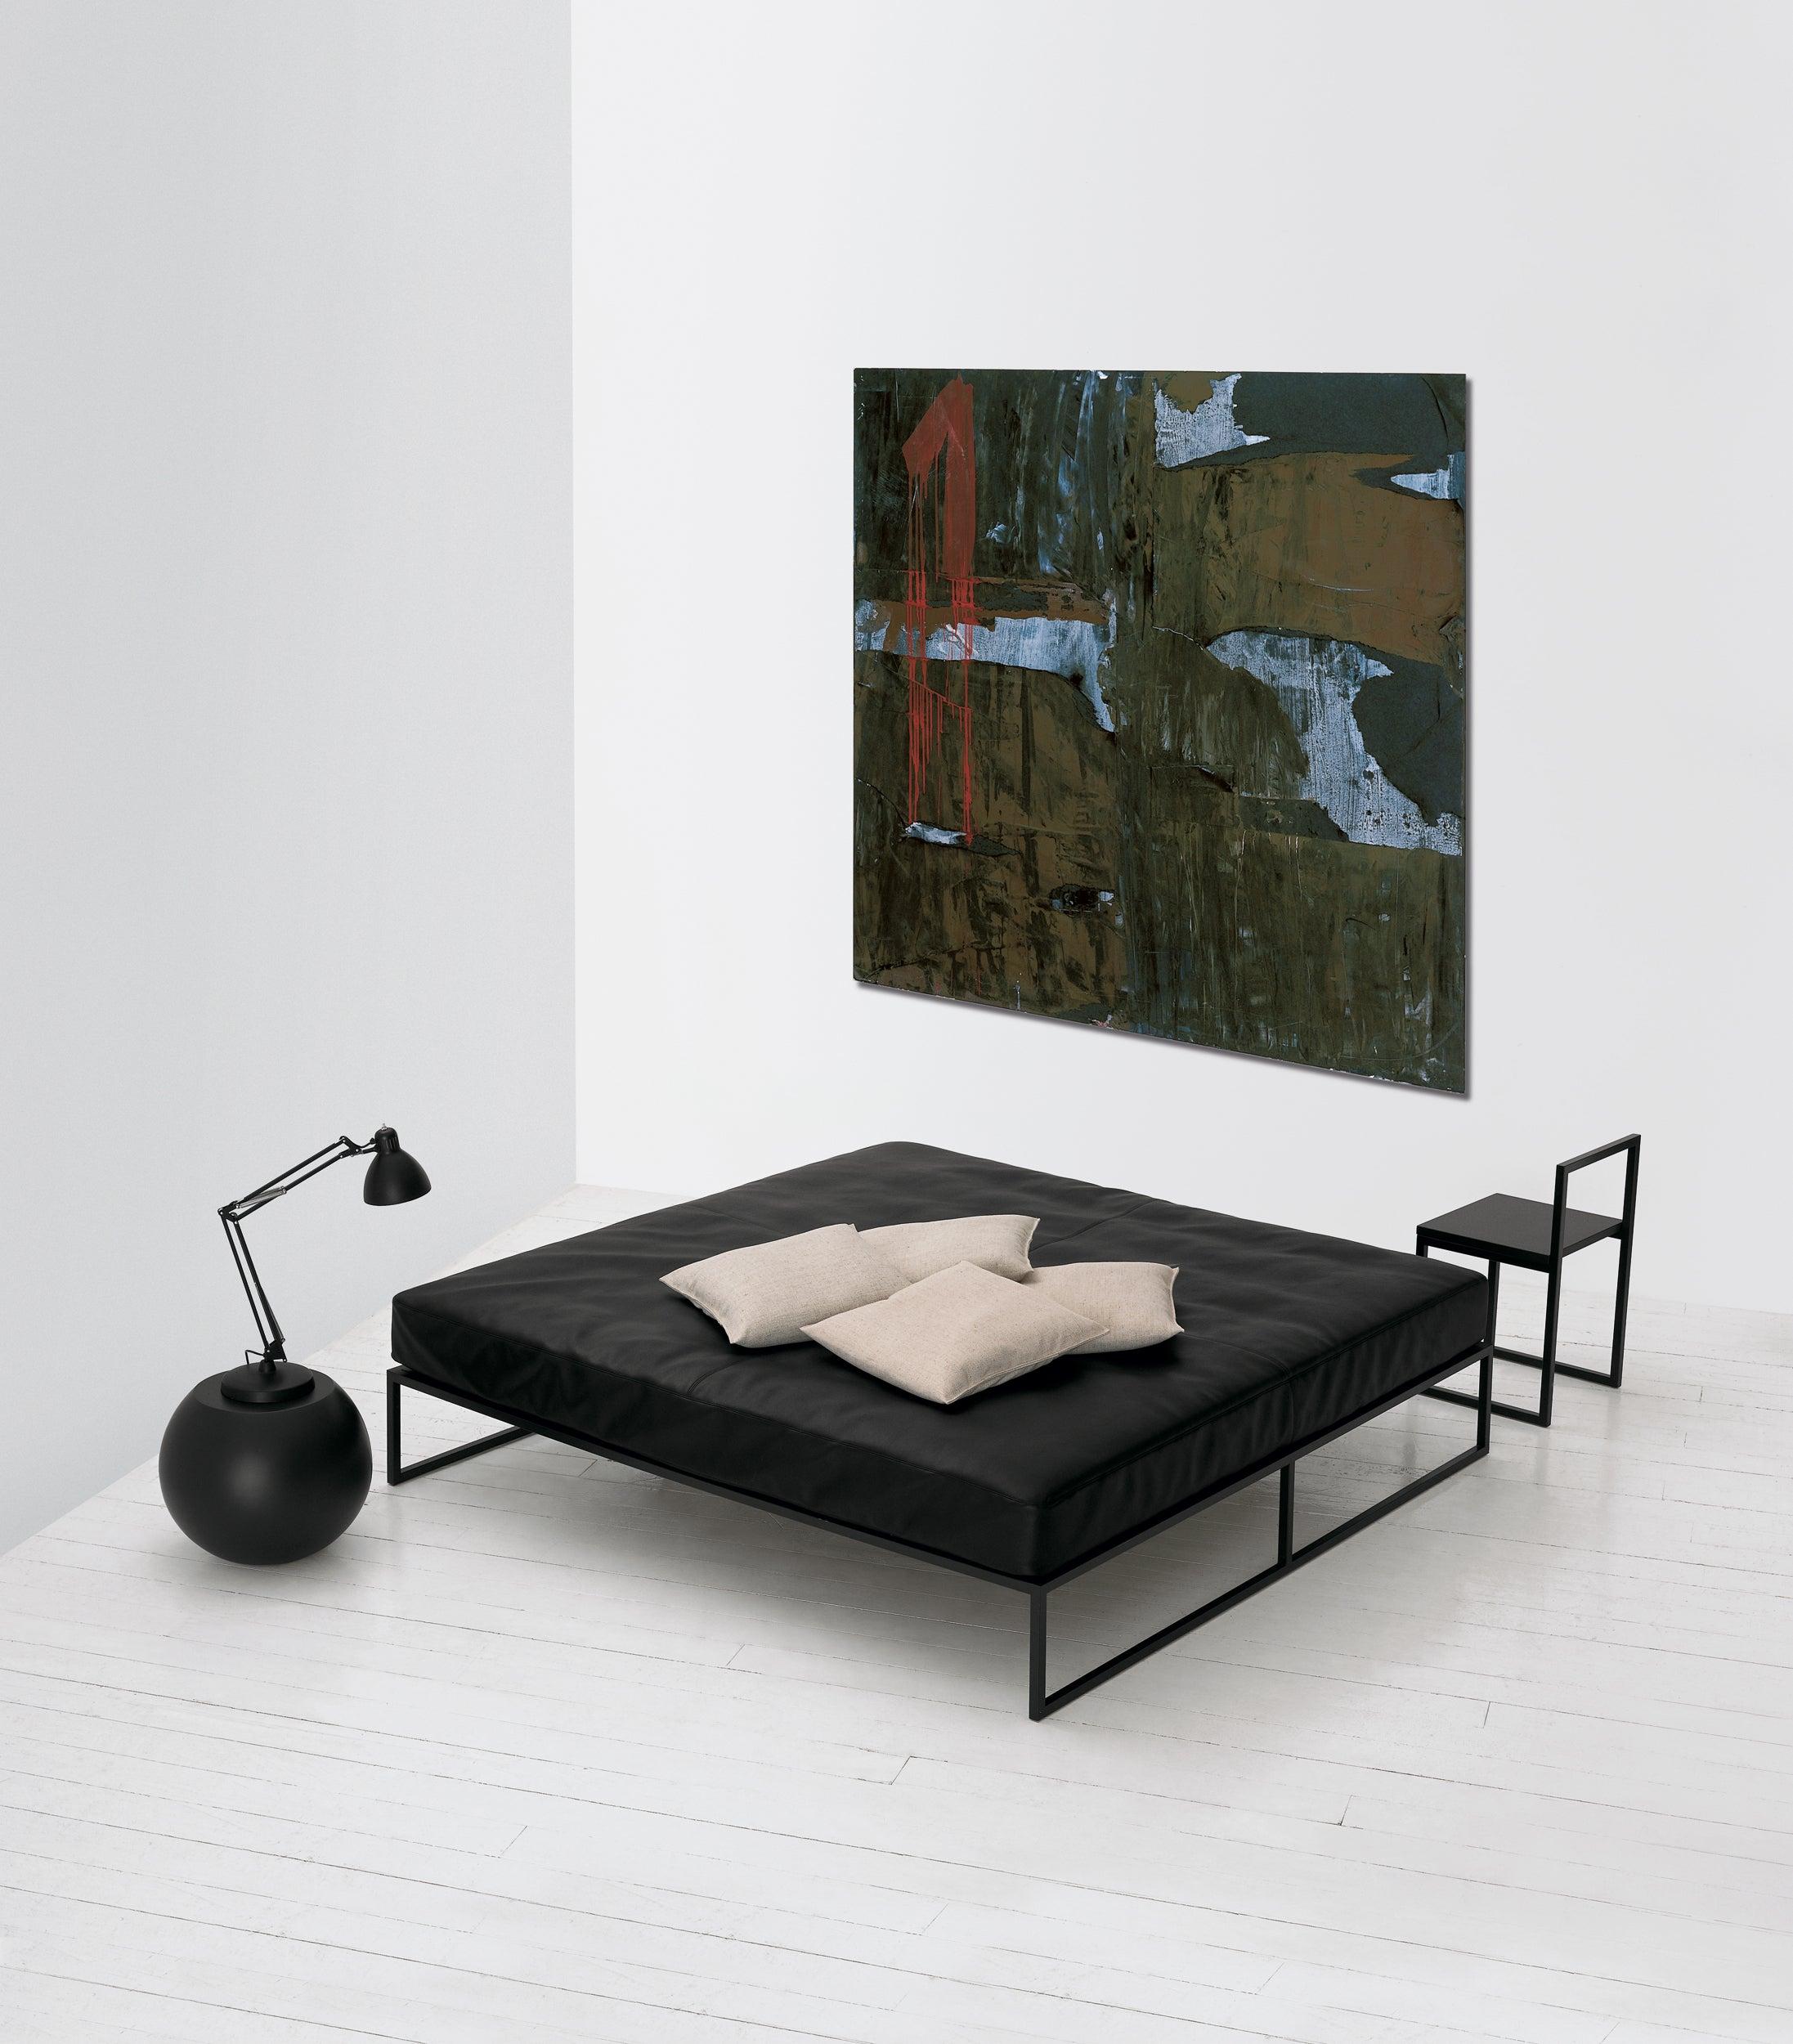 The perfect emblem of A.G. Fronzoniâ€™s works, the Fronzoni â€™64 bed is a conceptual furnishing piece; a sober and essential encounter of straight lines with spatial planes, where geometry reigns supreme. This bed is made entirely of squared